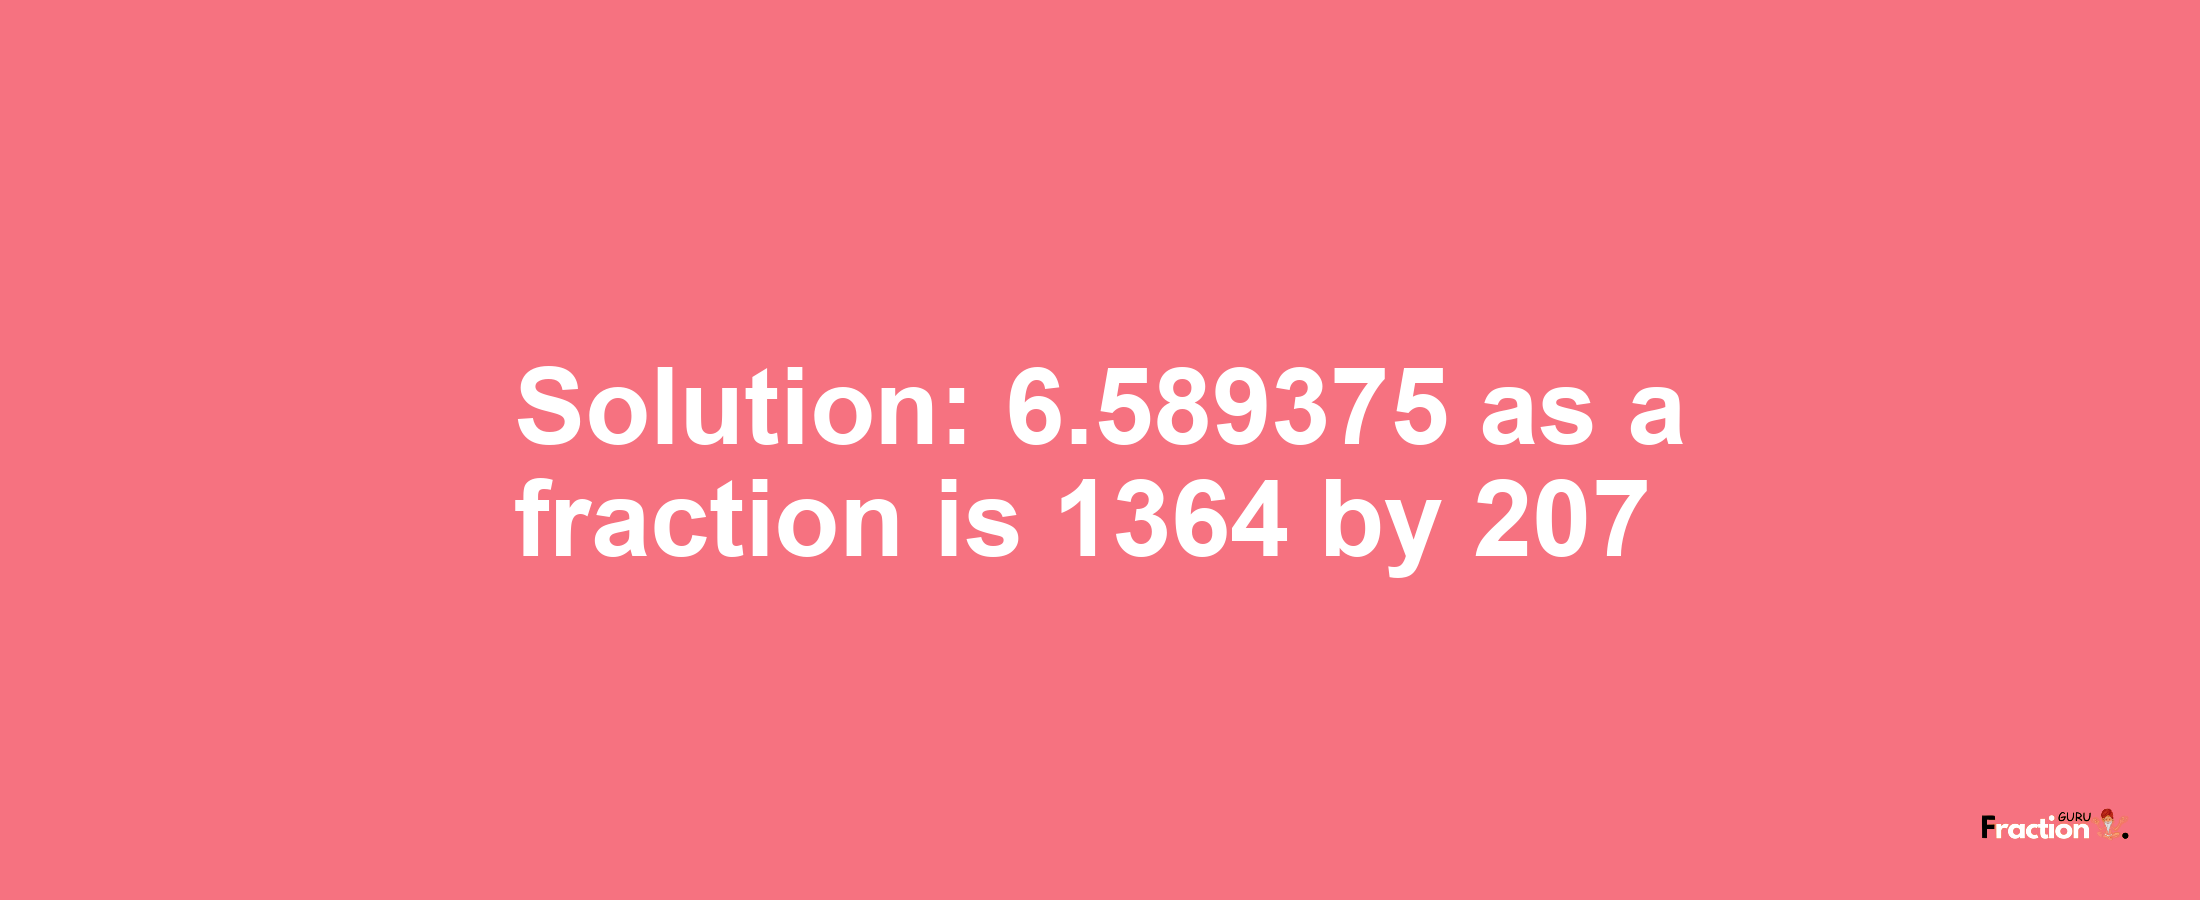 Solution:6.589375 as a fraction is 1364/207